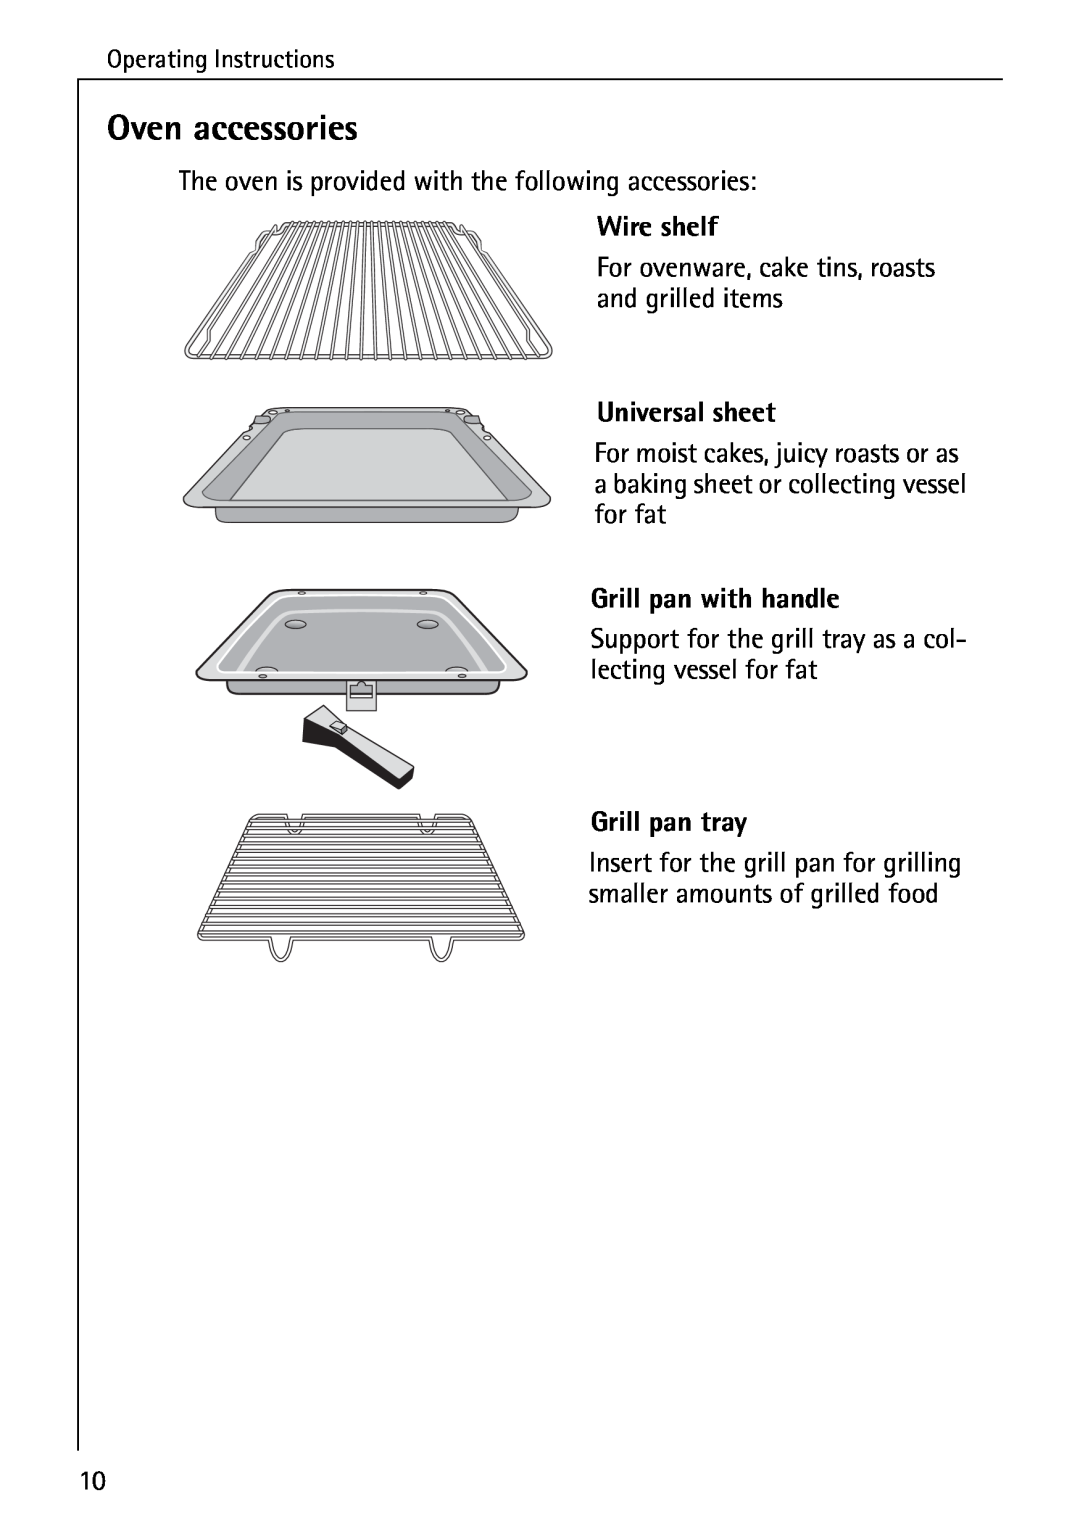 AEG B 4100 operating instructions Oven accessories, Wire shelf, Universal sheet, Grill pan with handle, Grill pan tray 